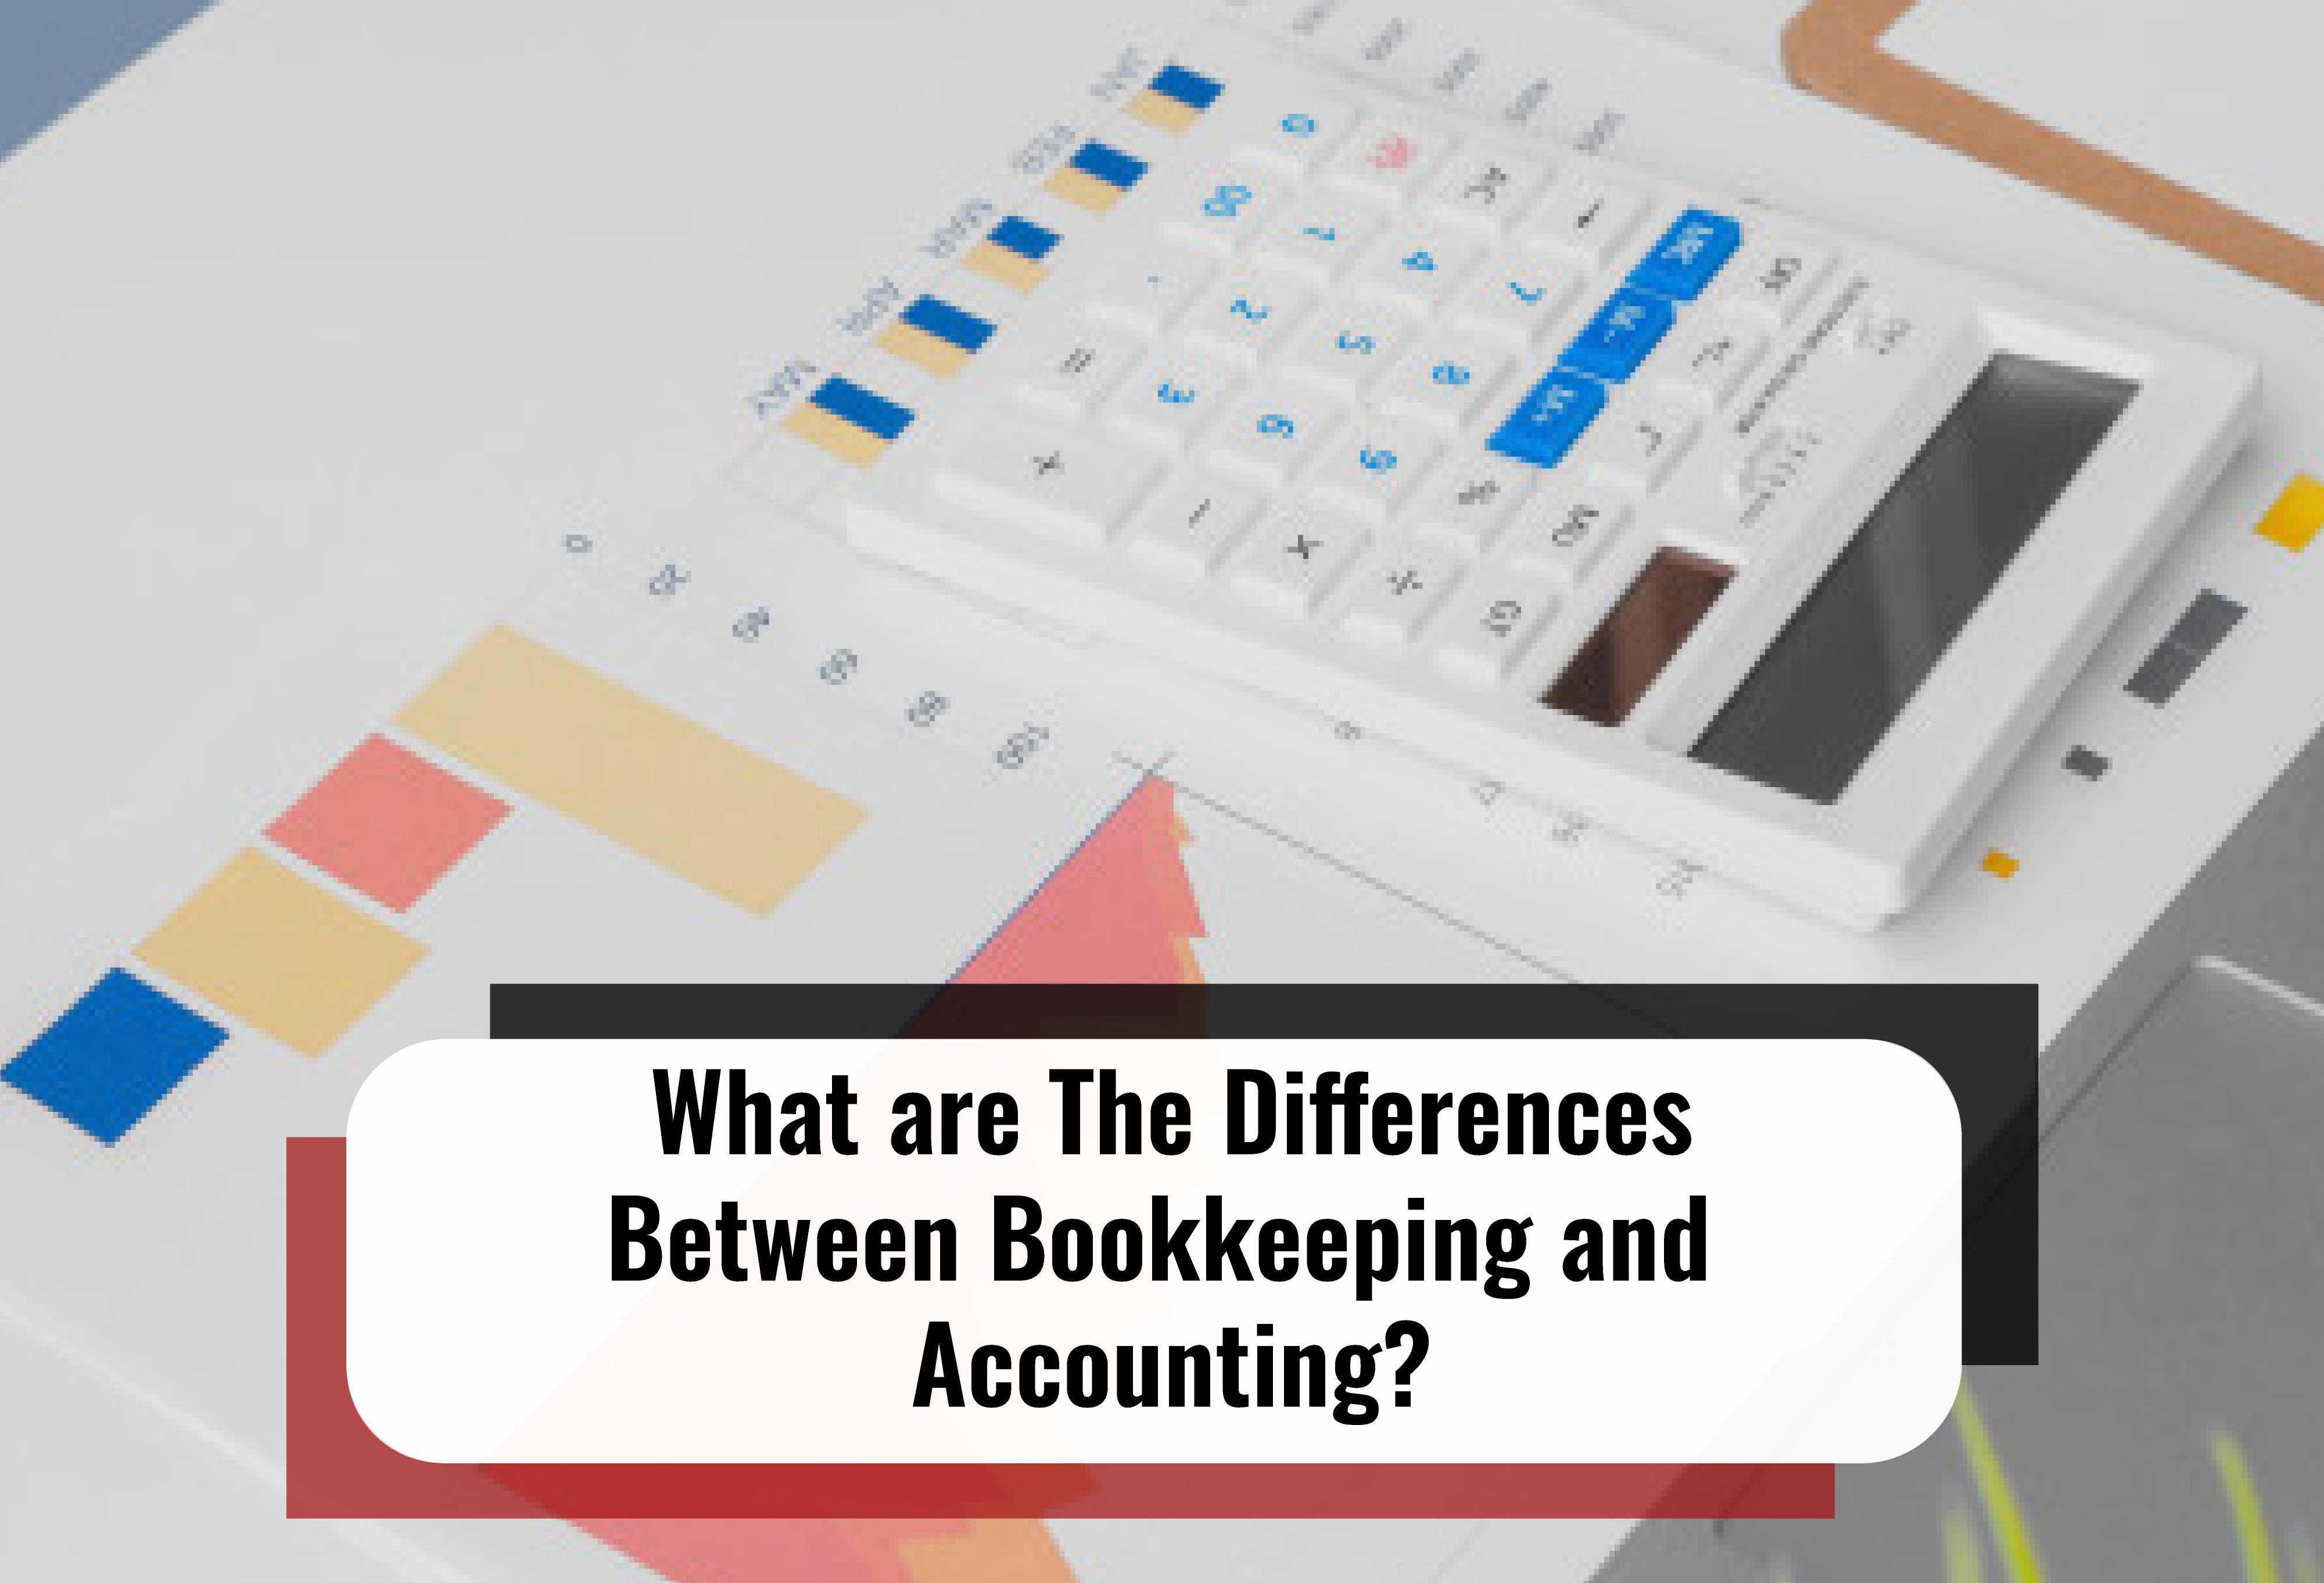 You are currently viewing A Guide on Tax Service in Toronto: What are The Differences Between Bookkeeping and Accounting?